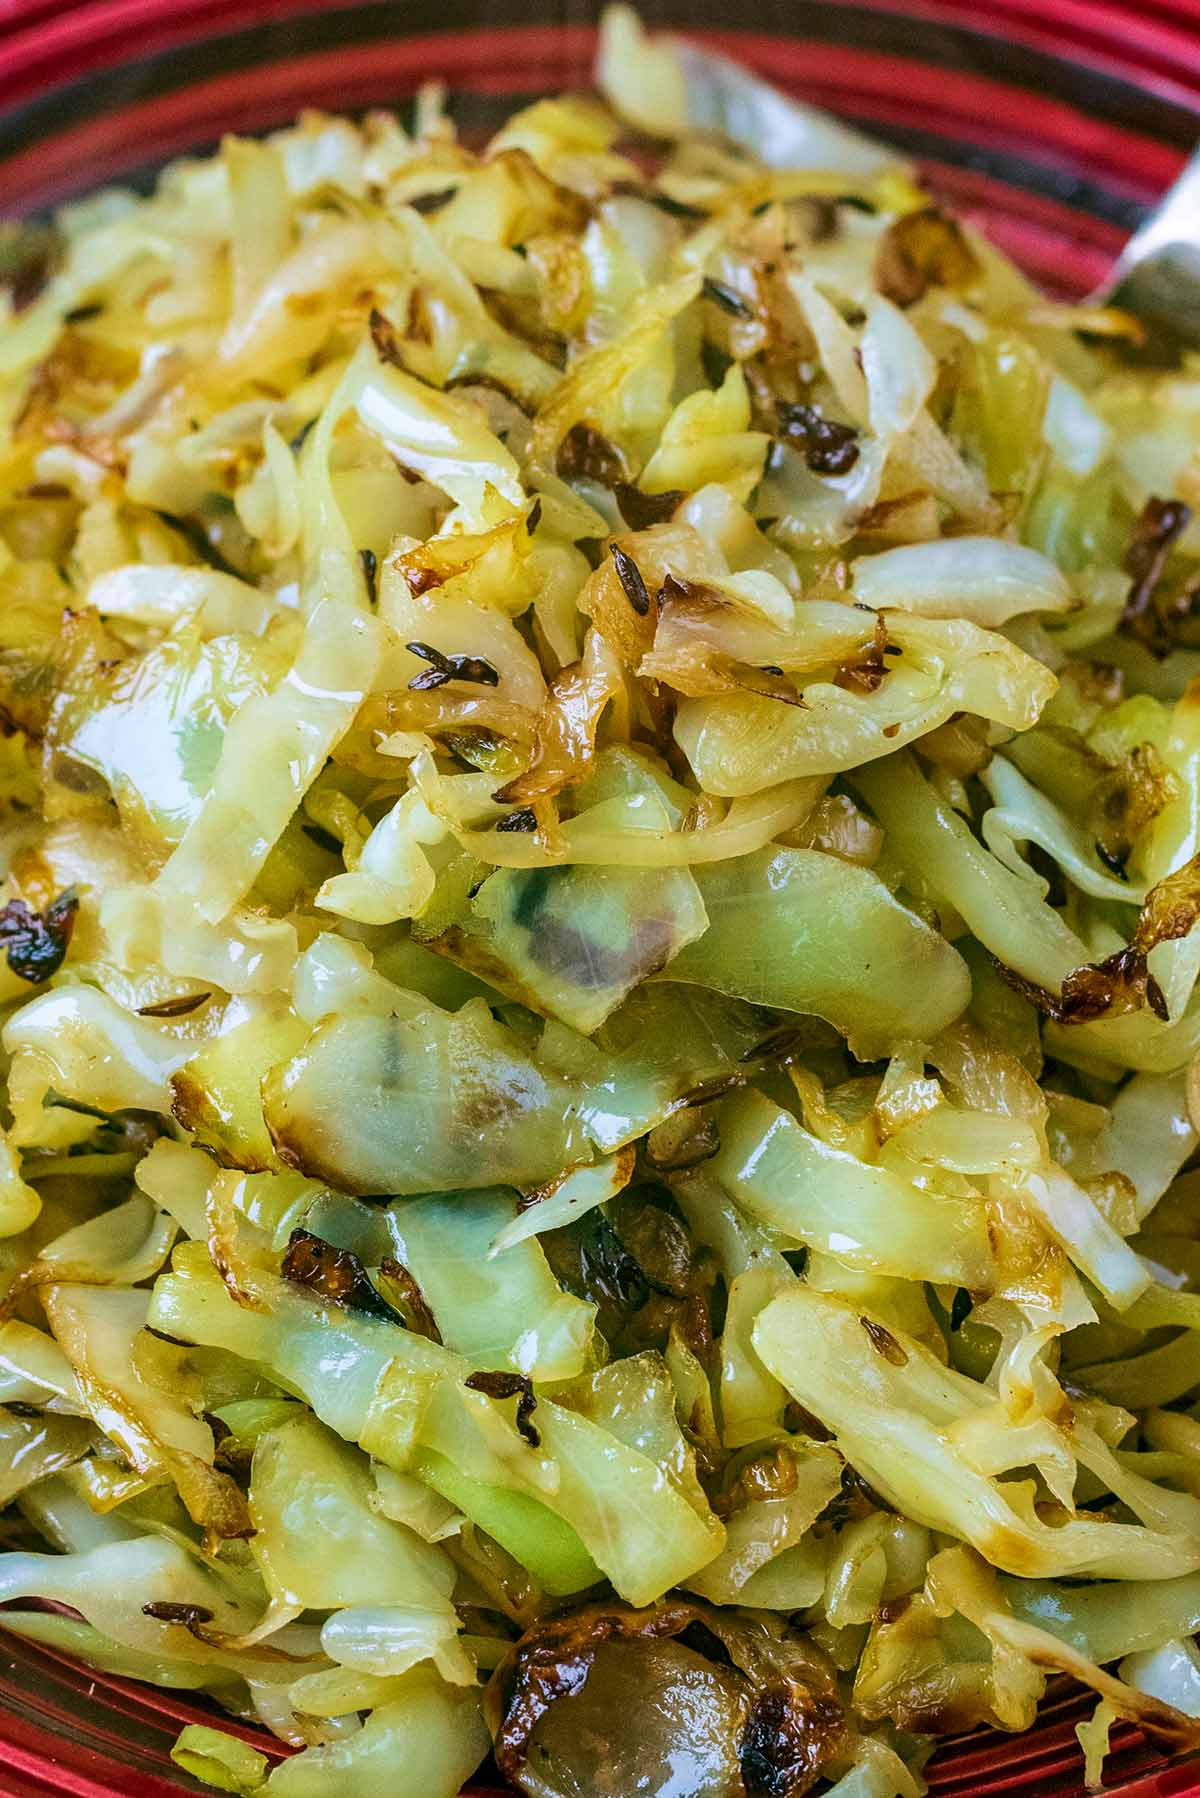 Cooked shredded cabbage with cumin seeds and sliced garlc.